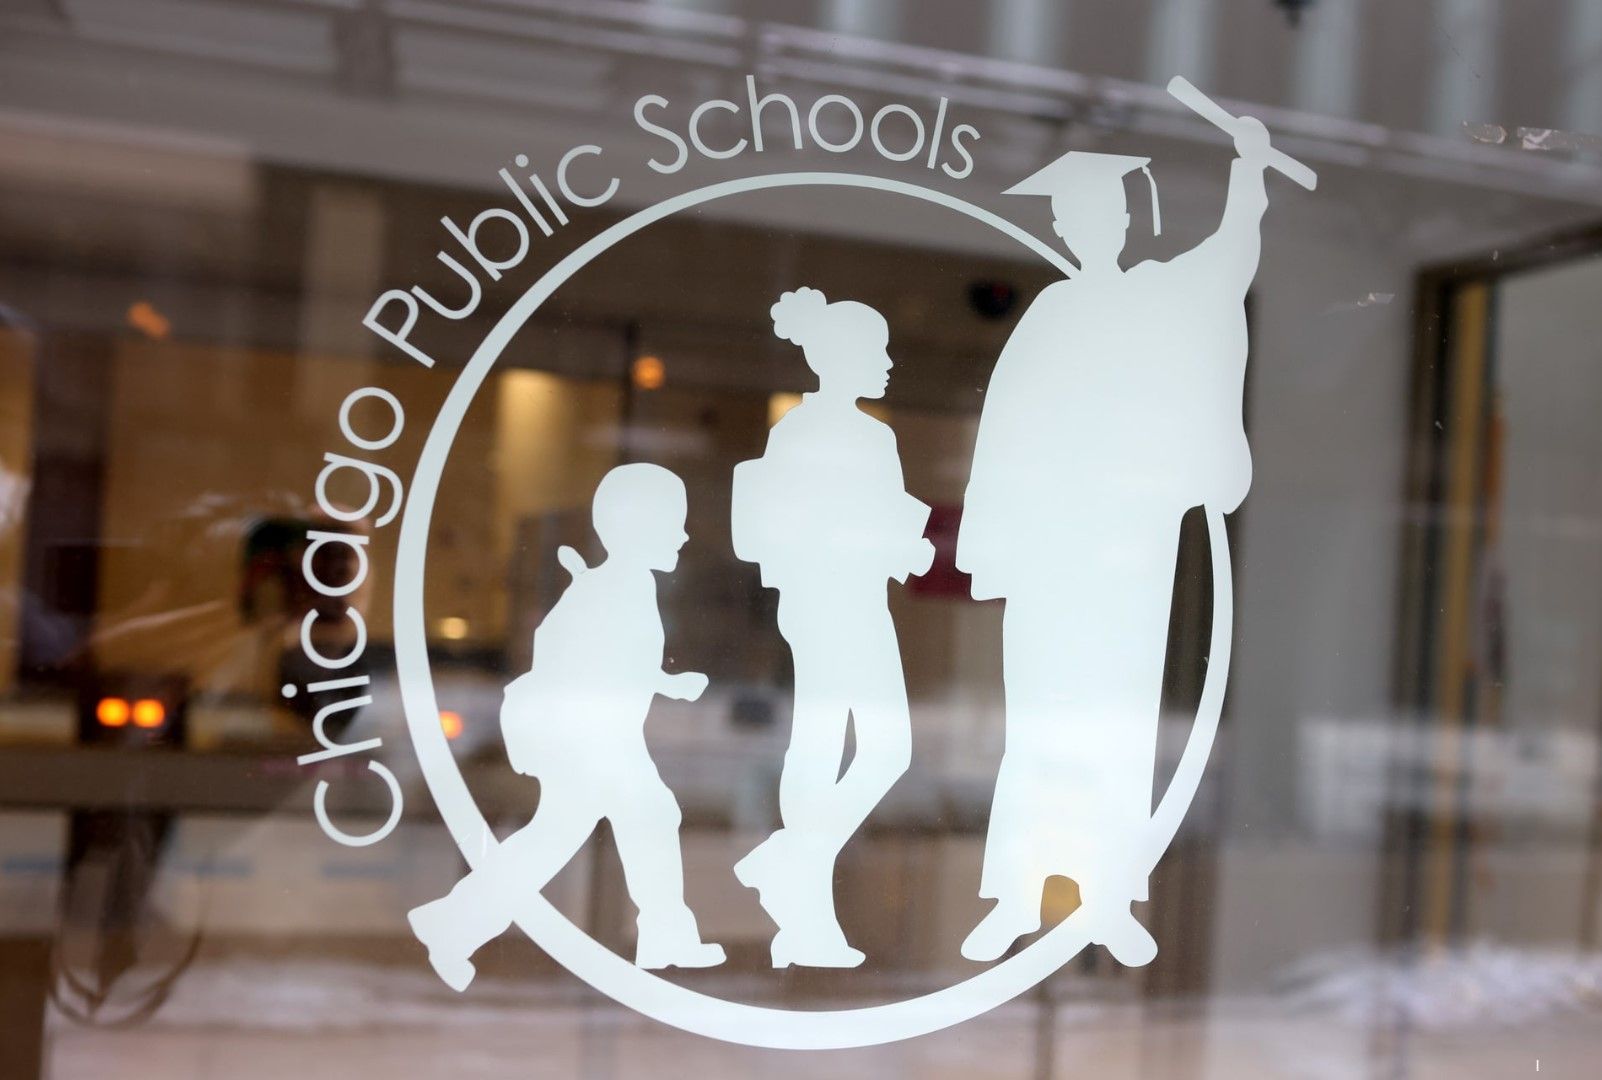 Breach exposed data of half-million Chicago students, staff